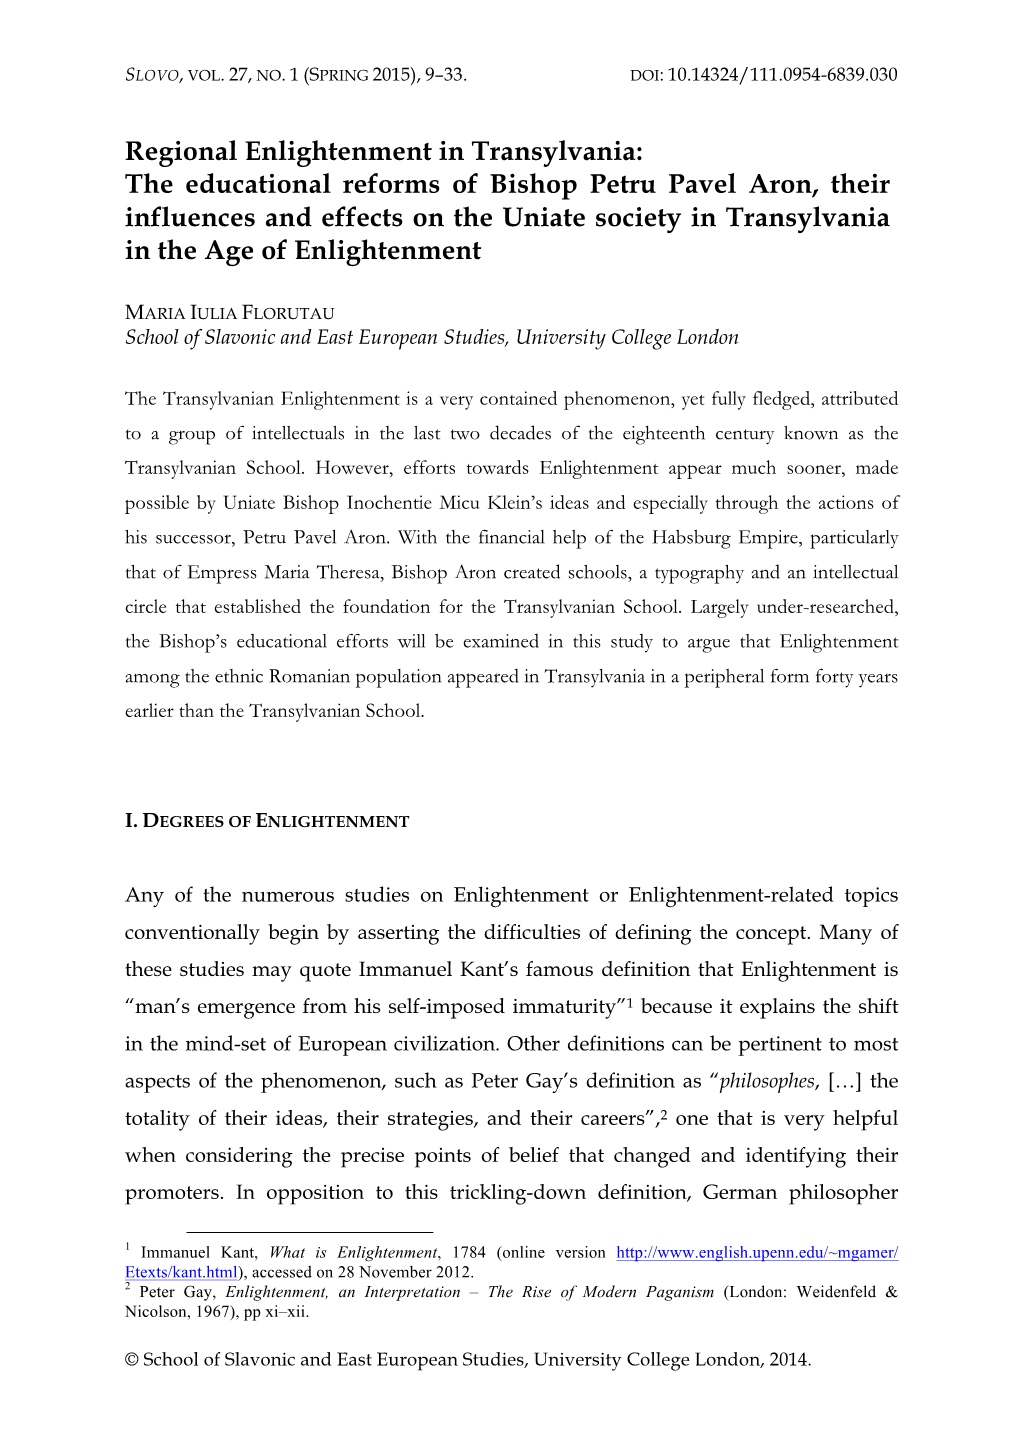 Regional Enlightenment in Transylvania: the Educational Reforms of Bishop Petru Pavel Aron, Their Influences and Effects On